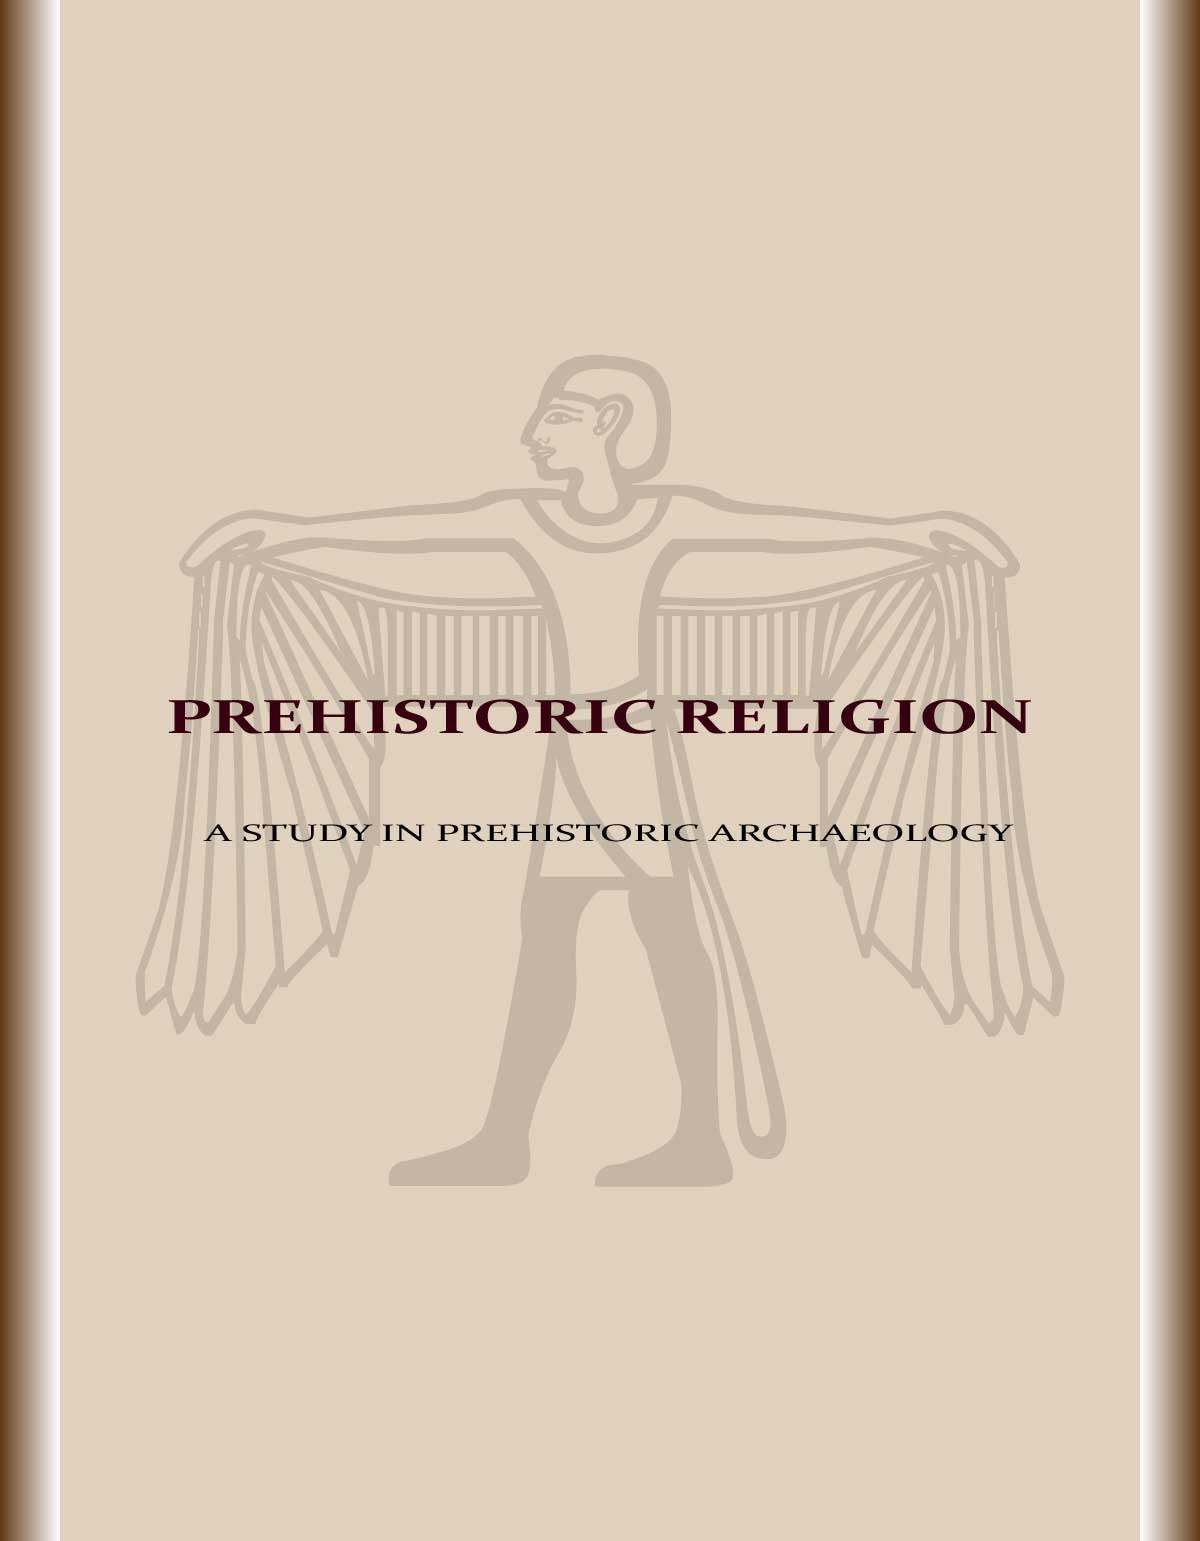 Prehistoric-religion-a-study-in-prehistoric-archaeology-book-cover